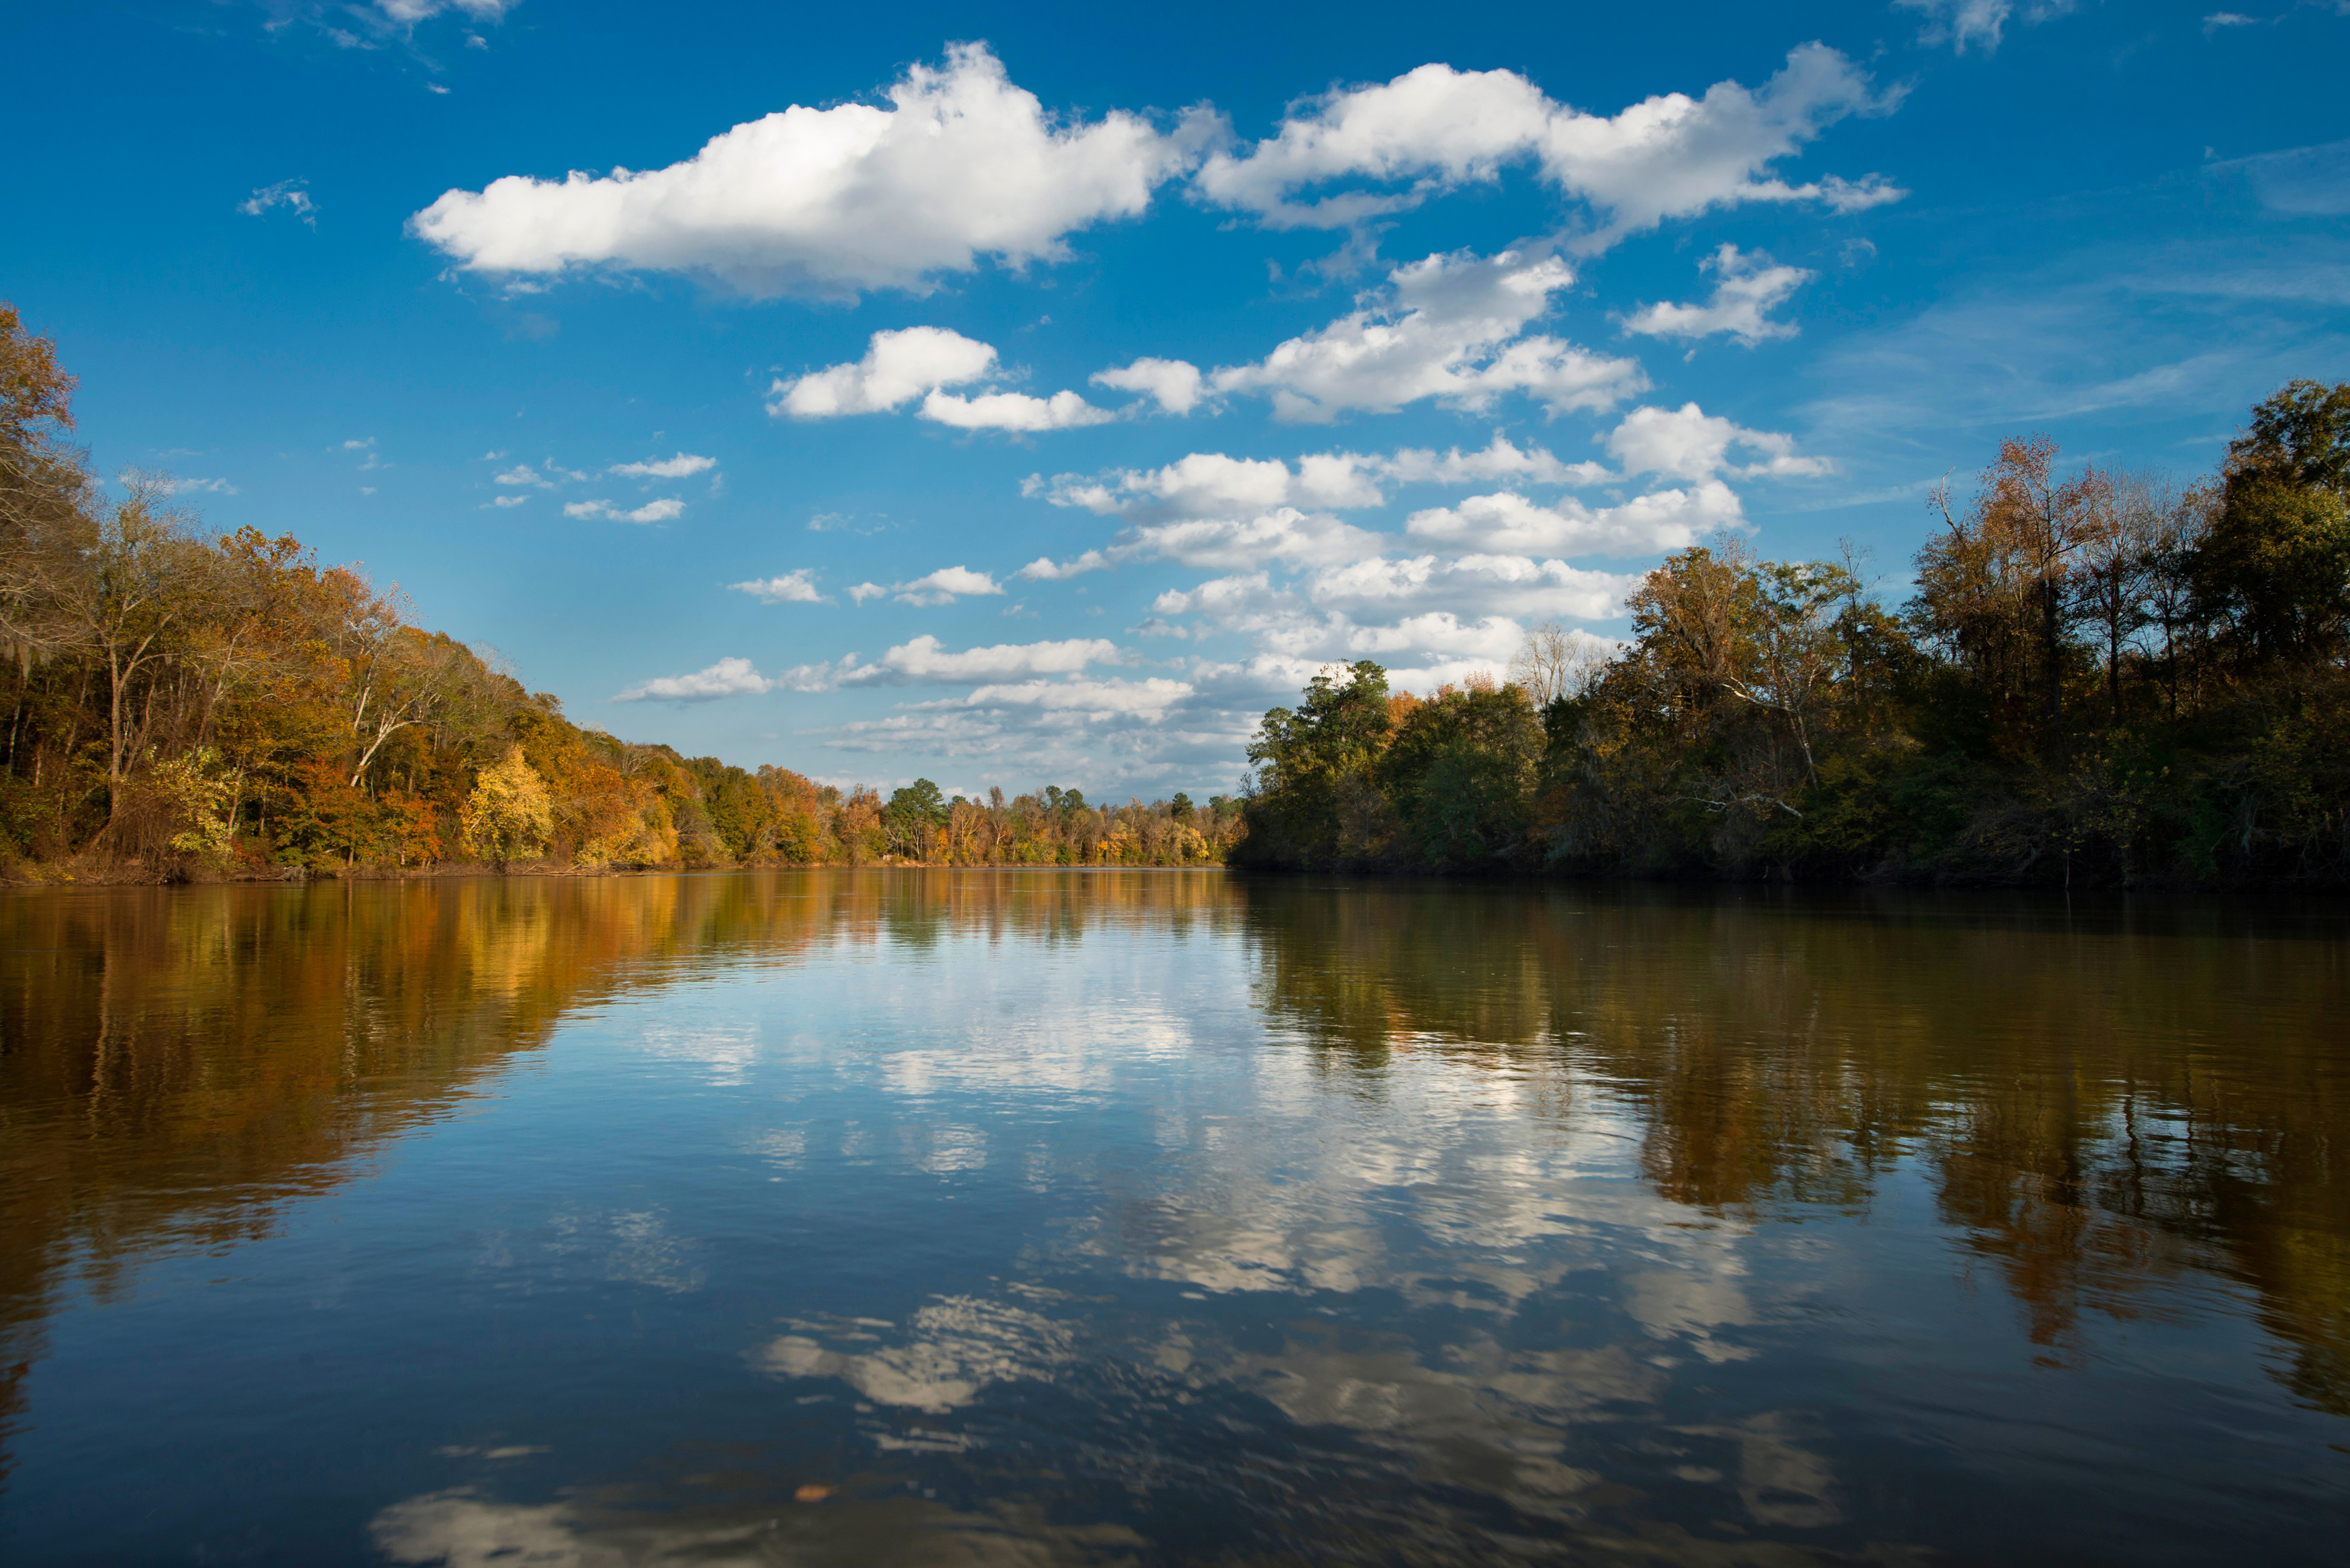 View of the Congaree River during the Fall